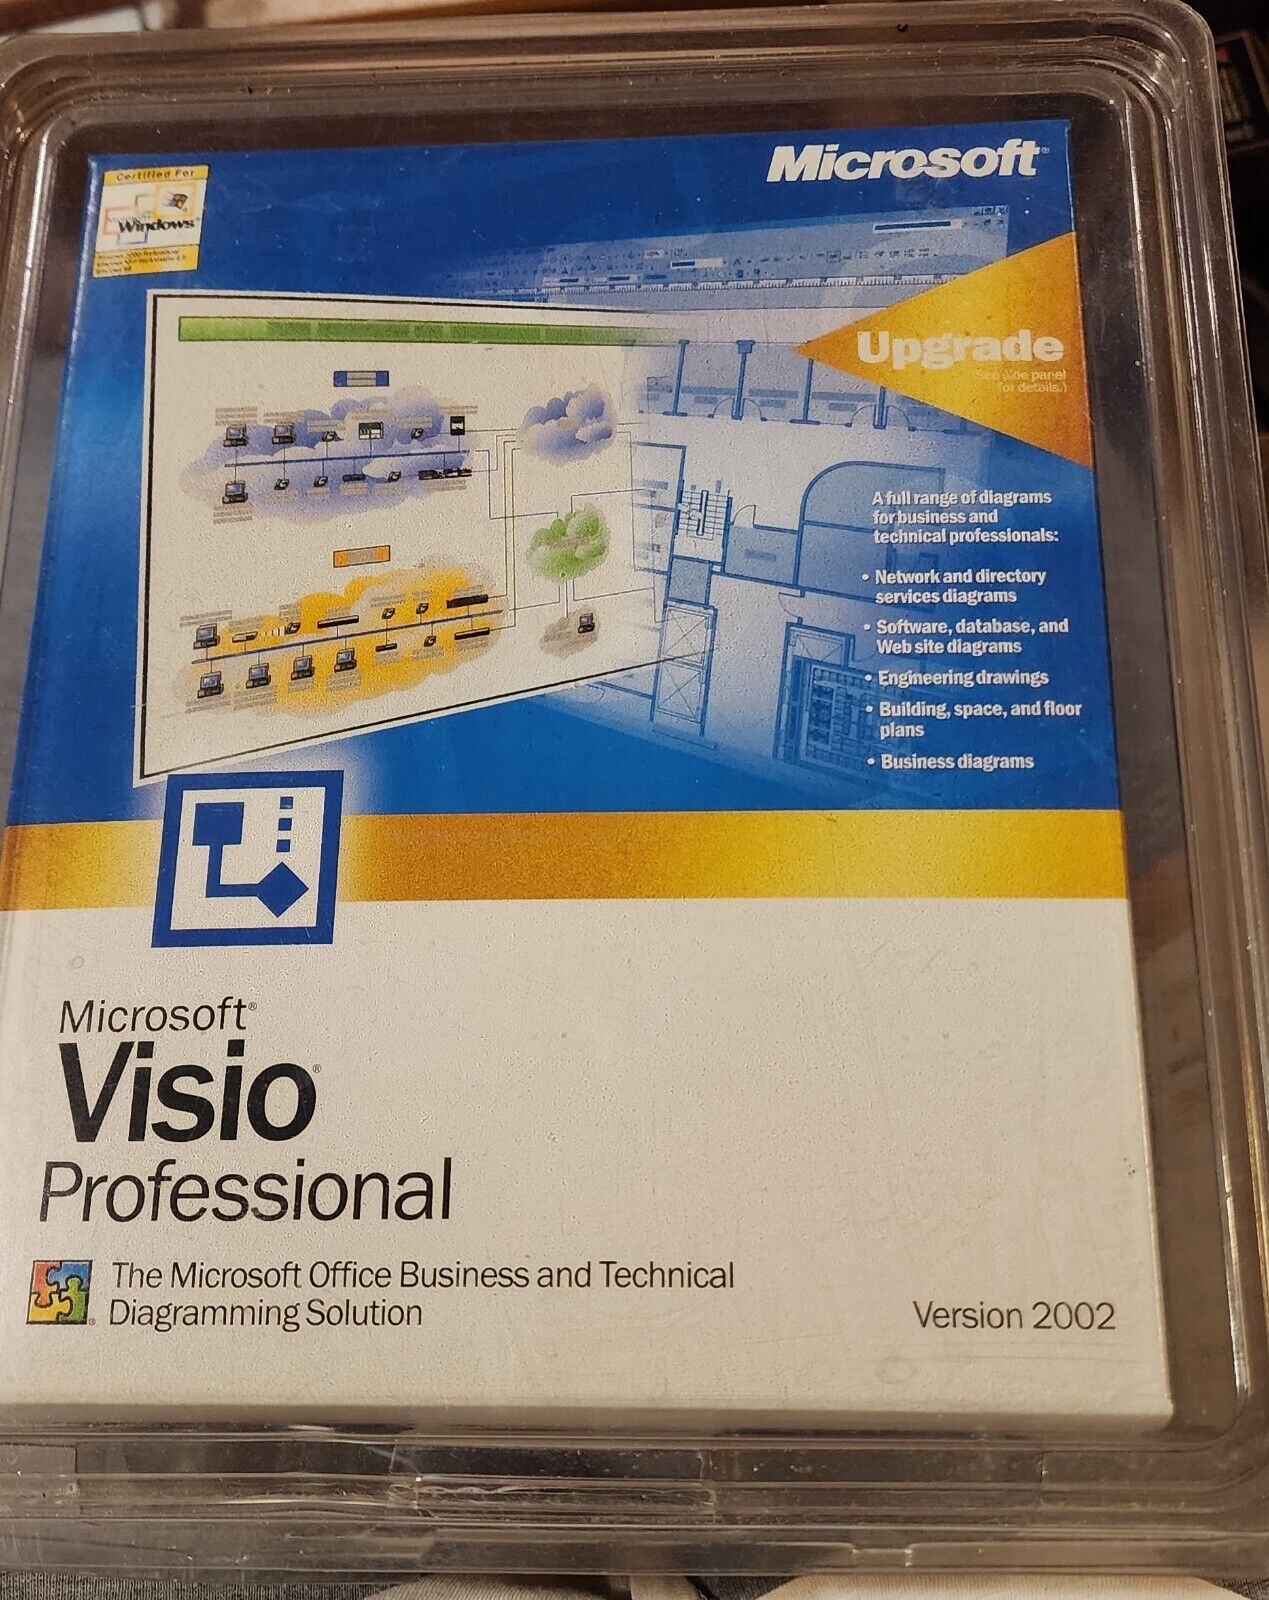 Microsoft Visio Professional Version 2002 (Sealed in clamshell)